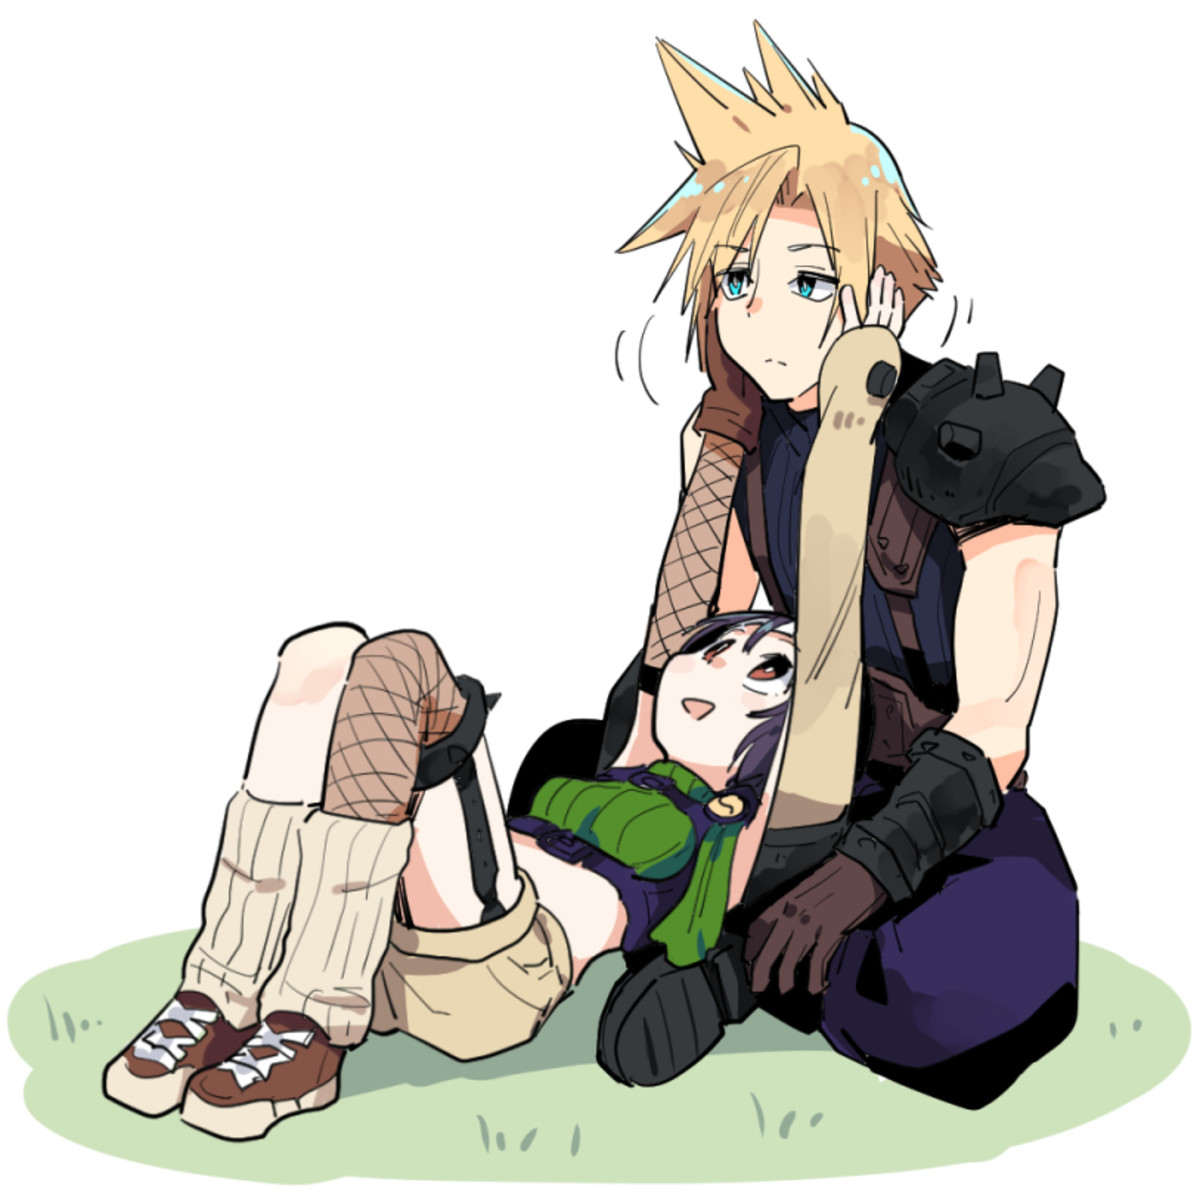 Yuffie and Cloud.